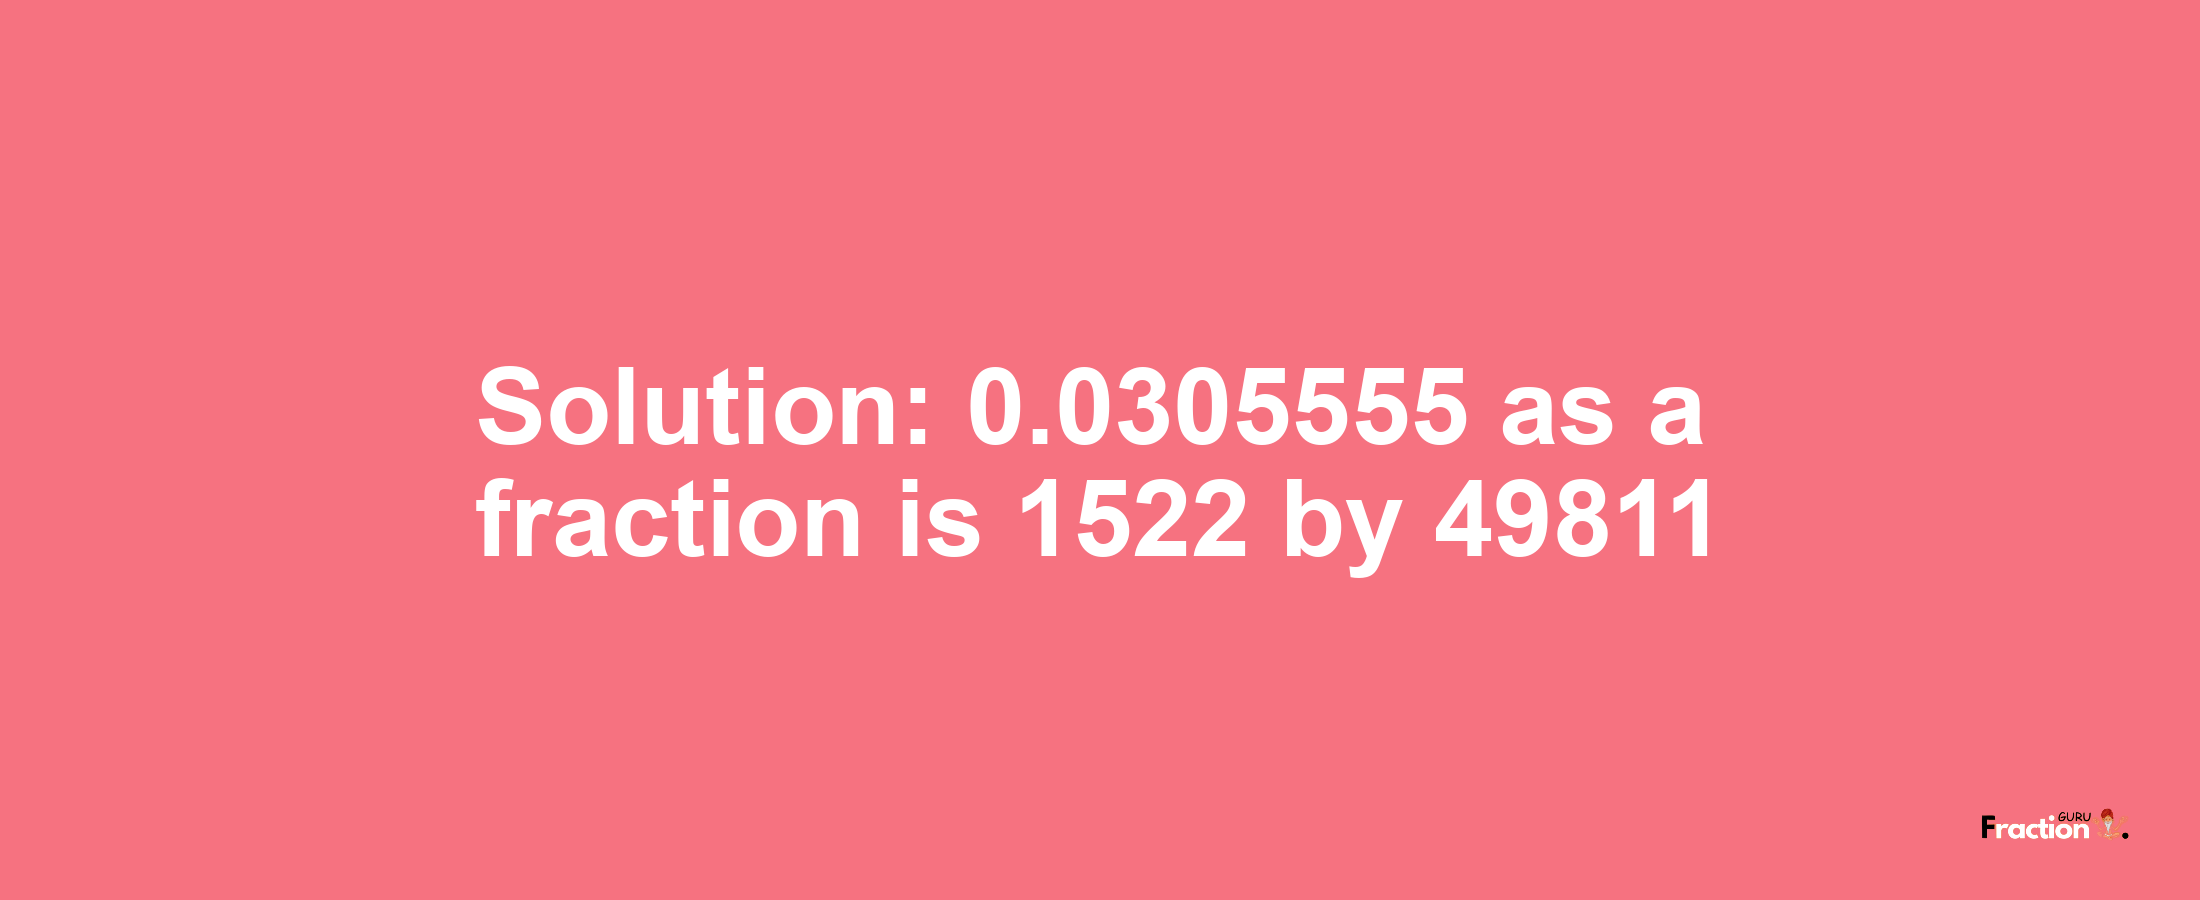 Solution:0.0305555 as a fraction is 1522/49811